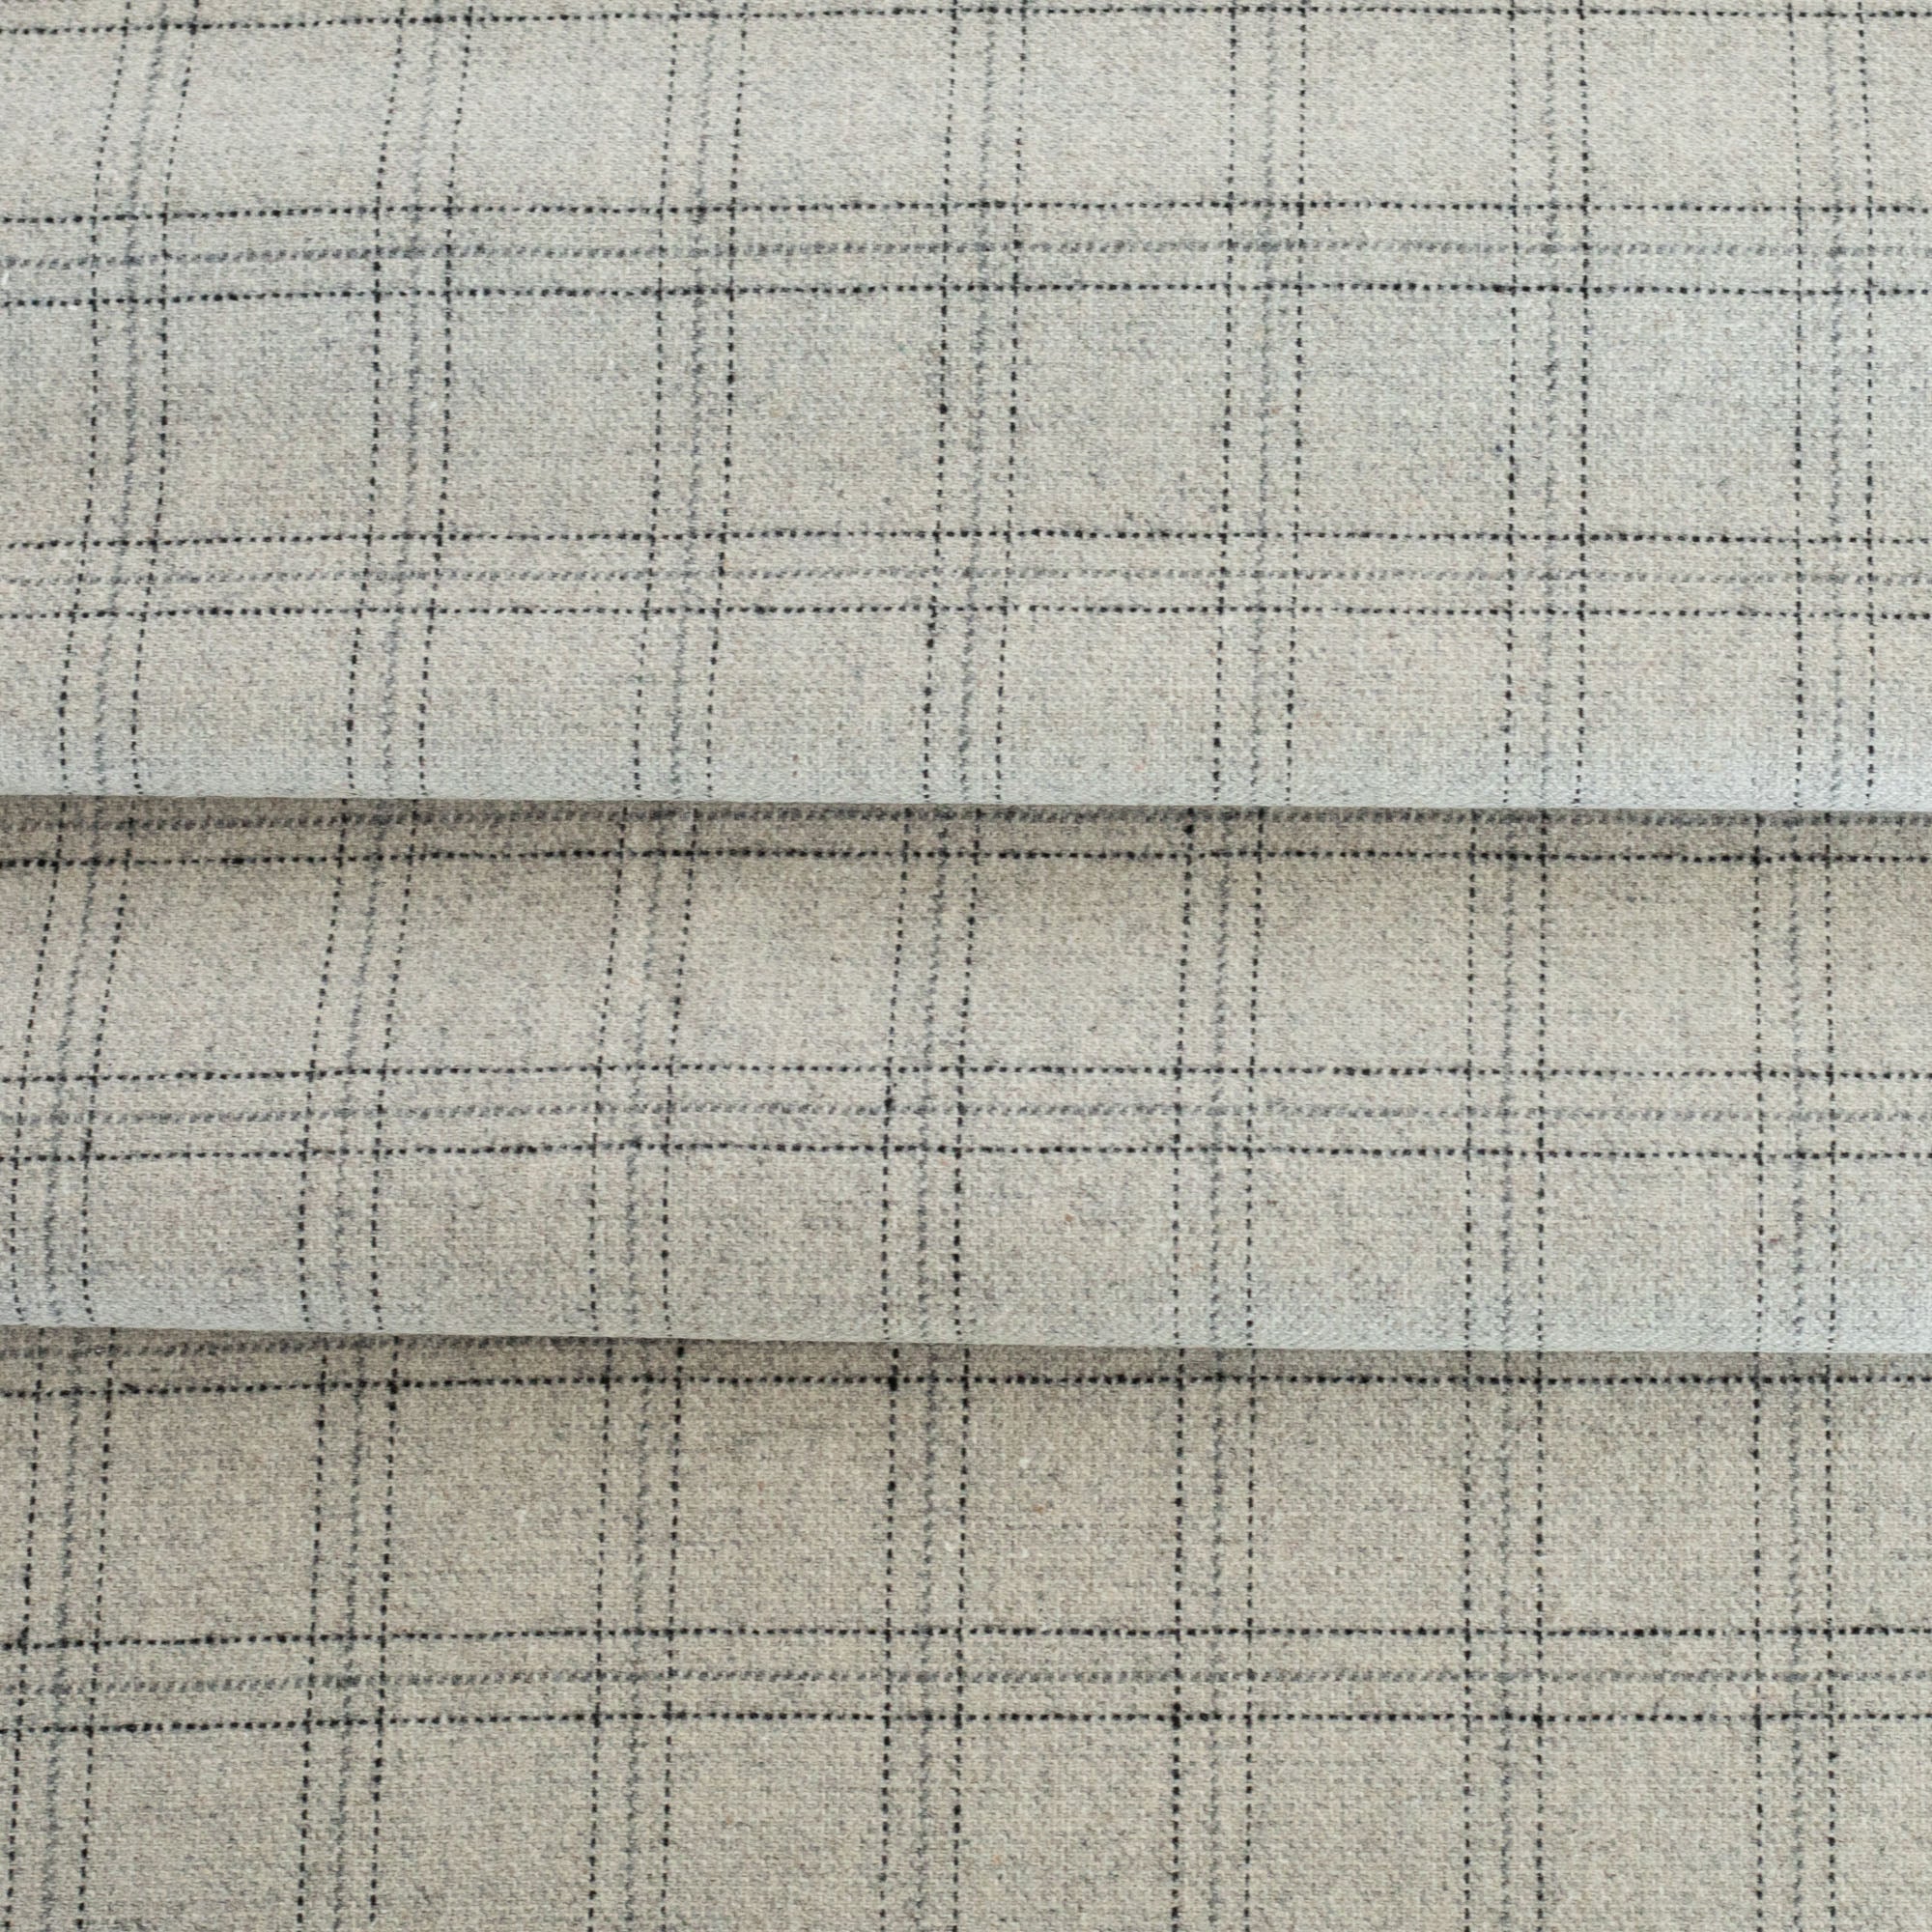 Dorset Plaid : a fog grey with fine blue and charcoal lines home decor fabric